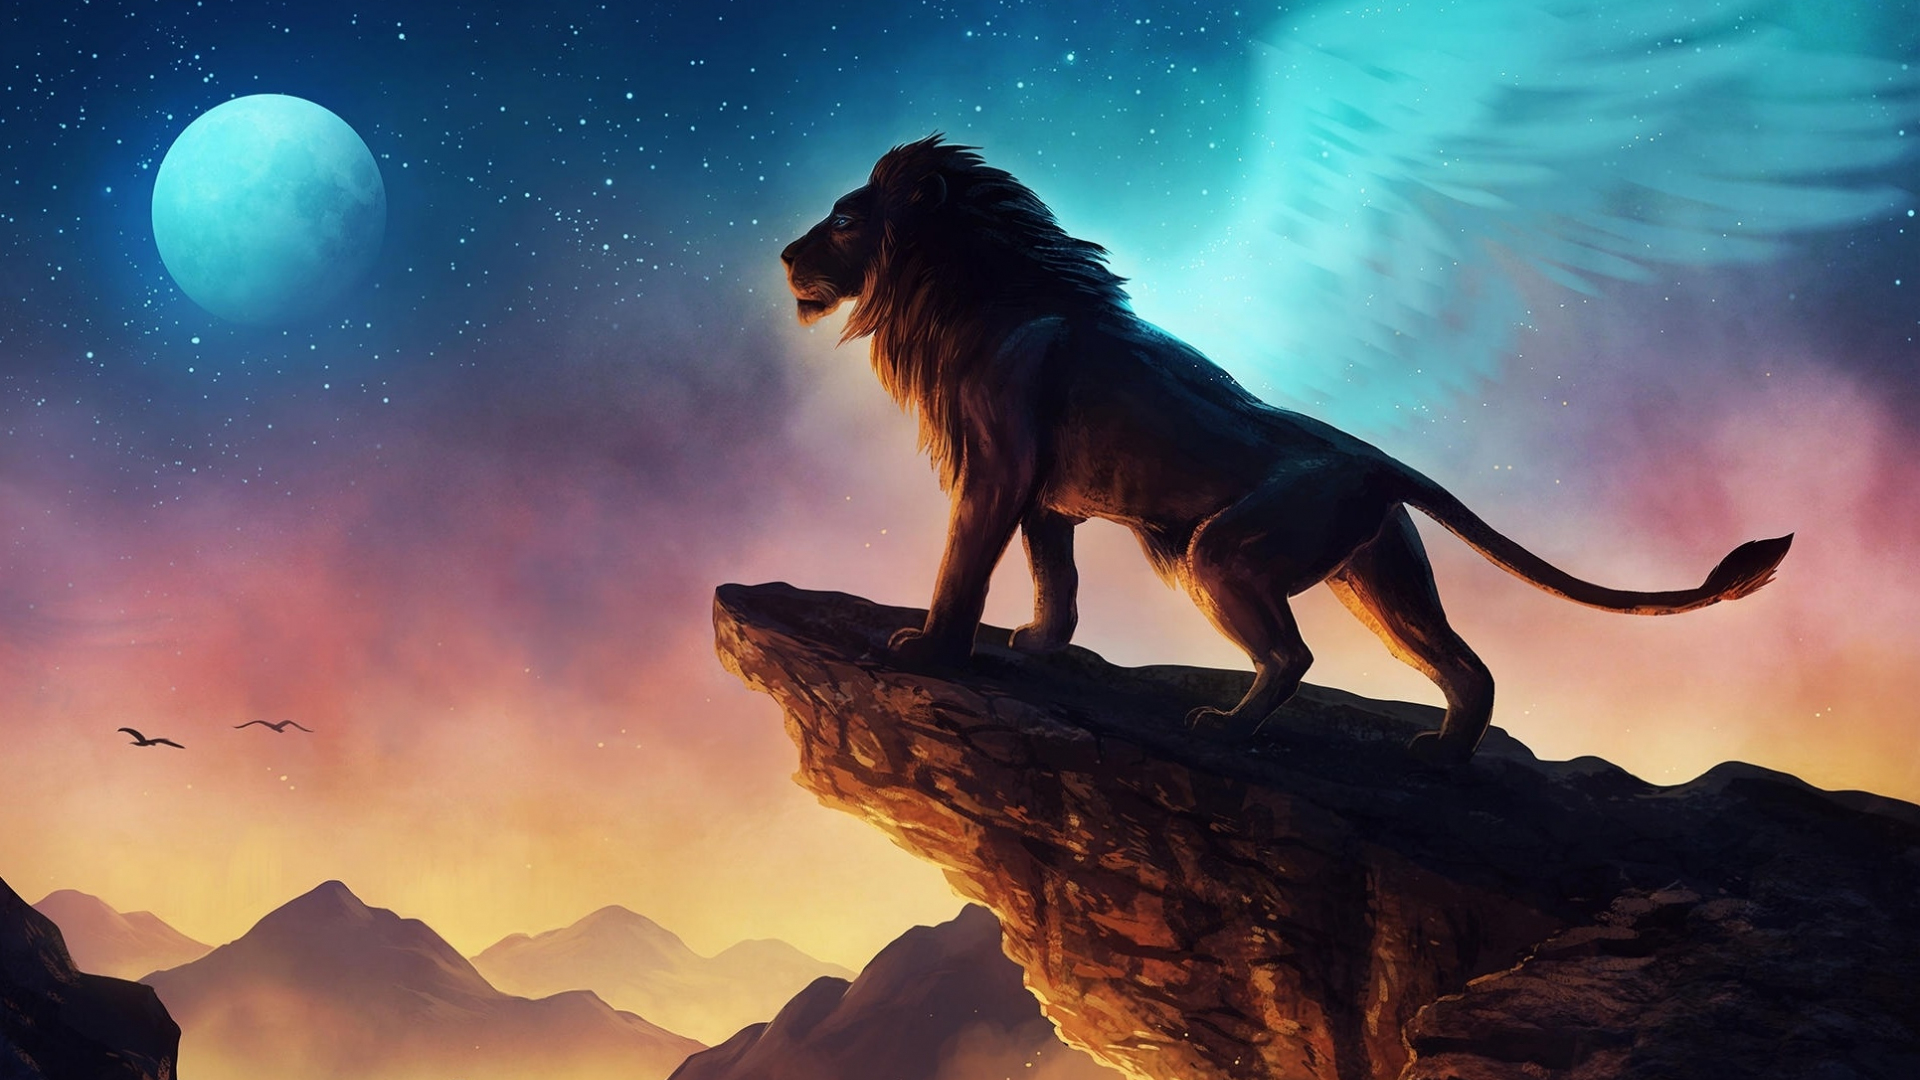 Download 1920x1080 wallpaper king of forest, lion, fantasy ...